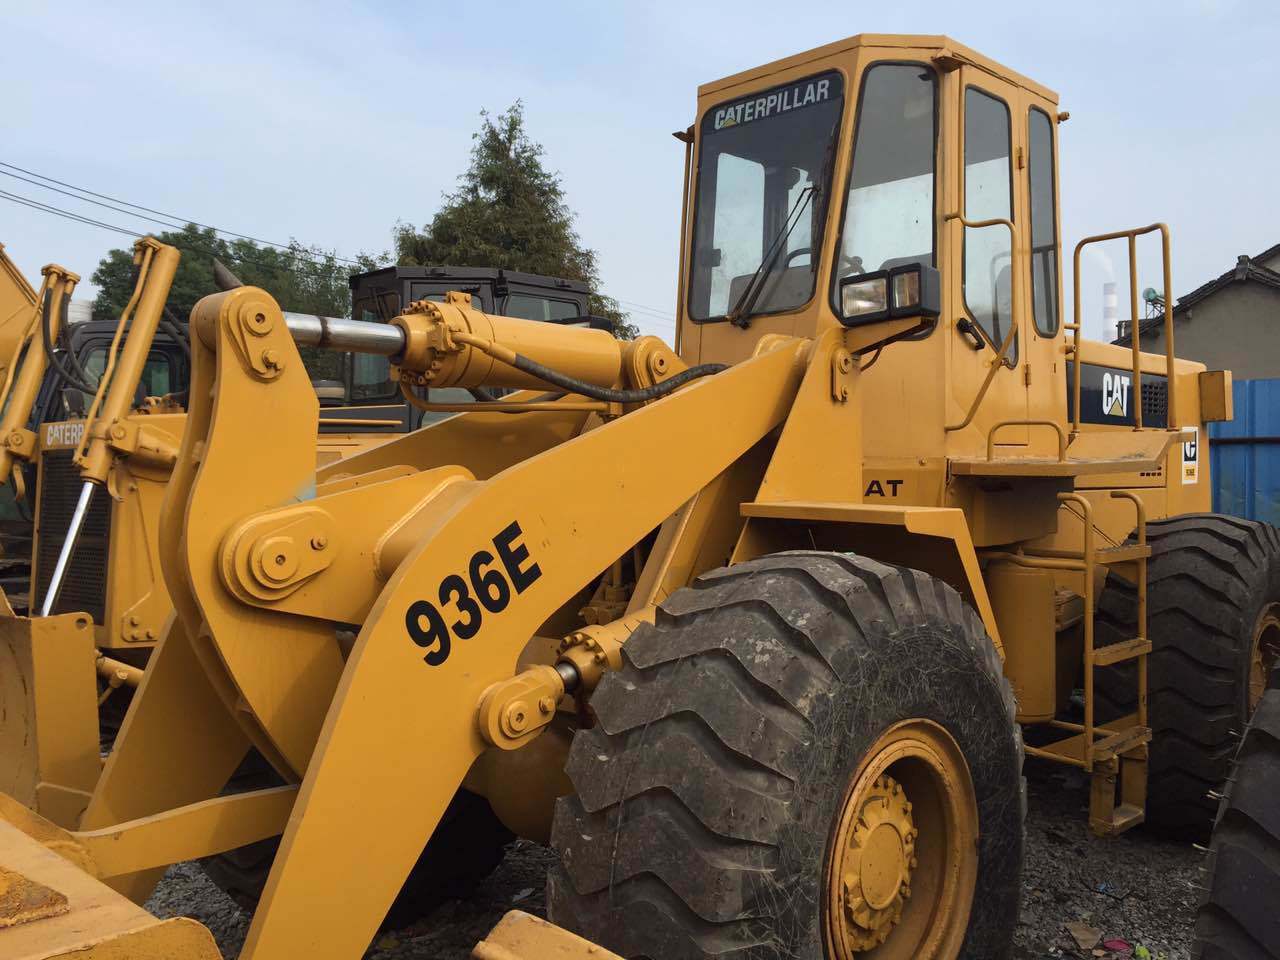 Used Caterpillar Wheel Loader Cat 936e for Sale